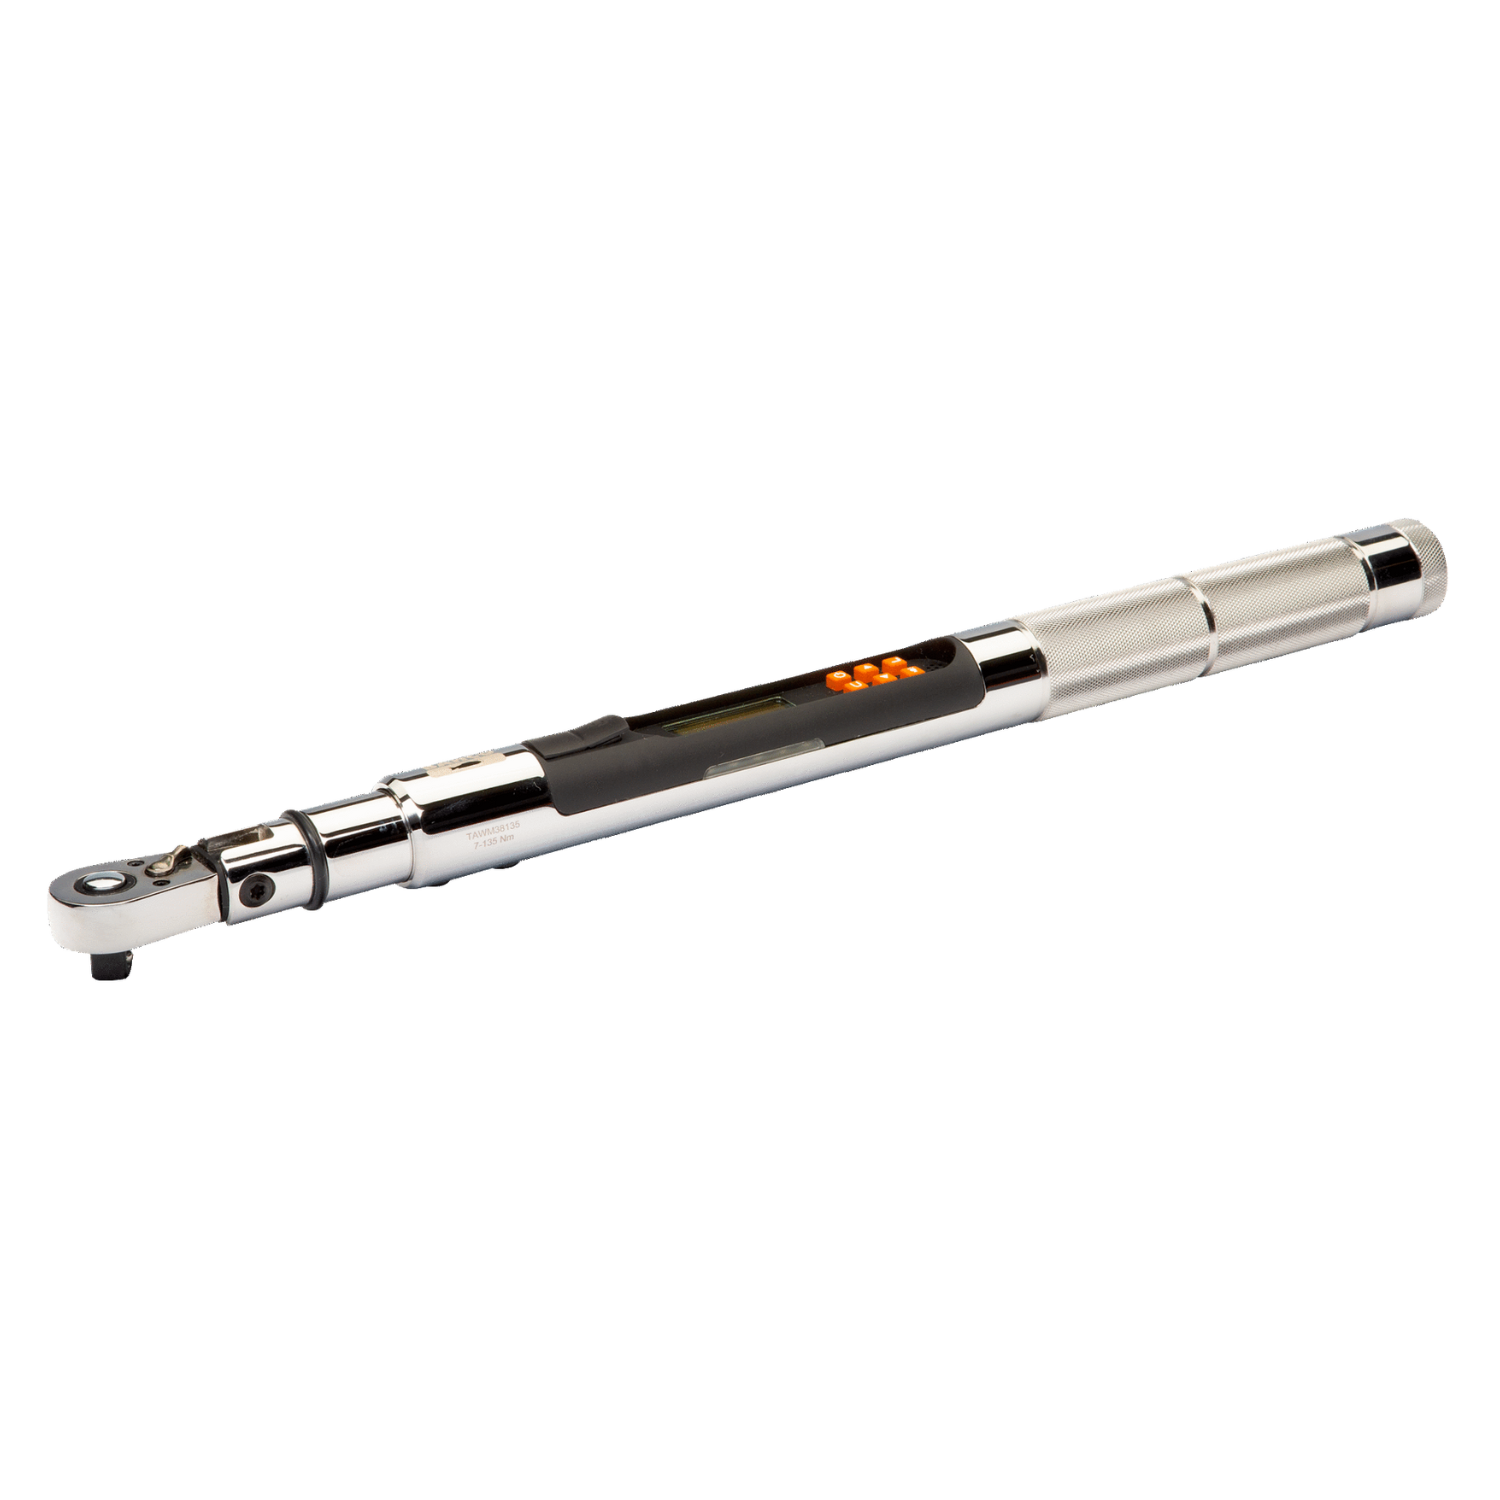 BAHCO TAWM Electronic Torque and Angle Wrench (BAHCO Tools) - Premium Torque and Angle Wrench from BAHCO - Shop now at Yew Aik.